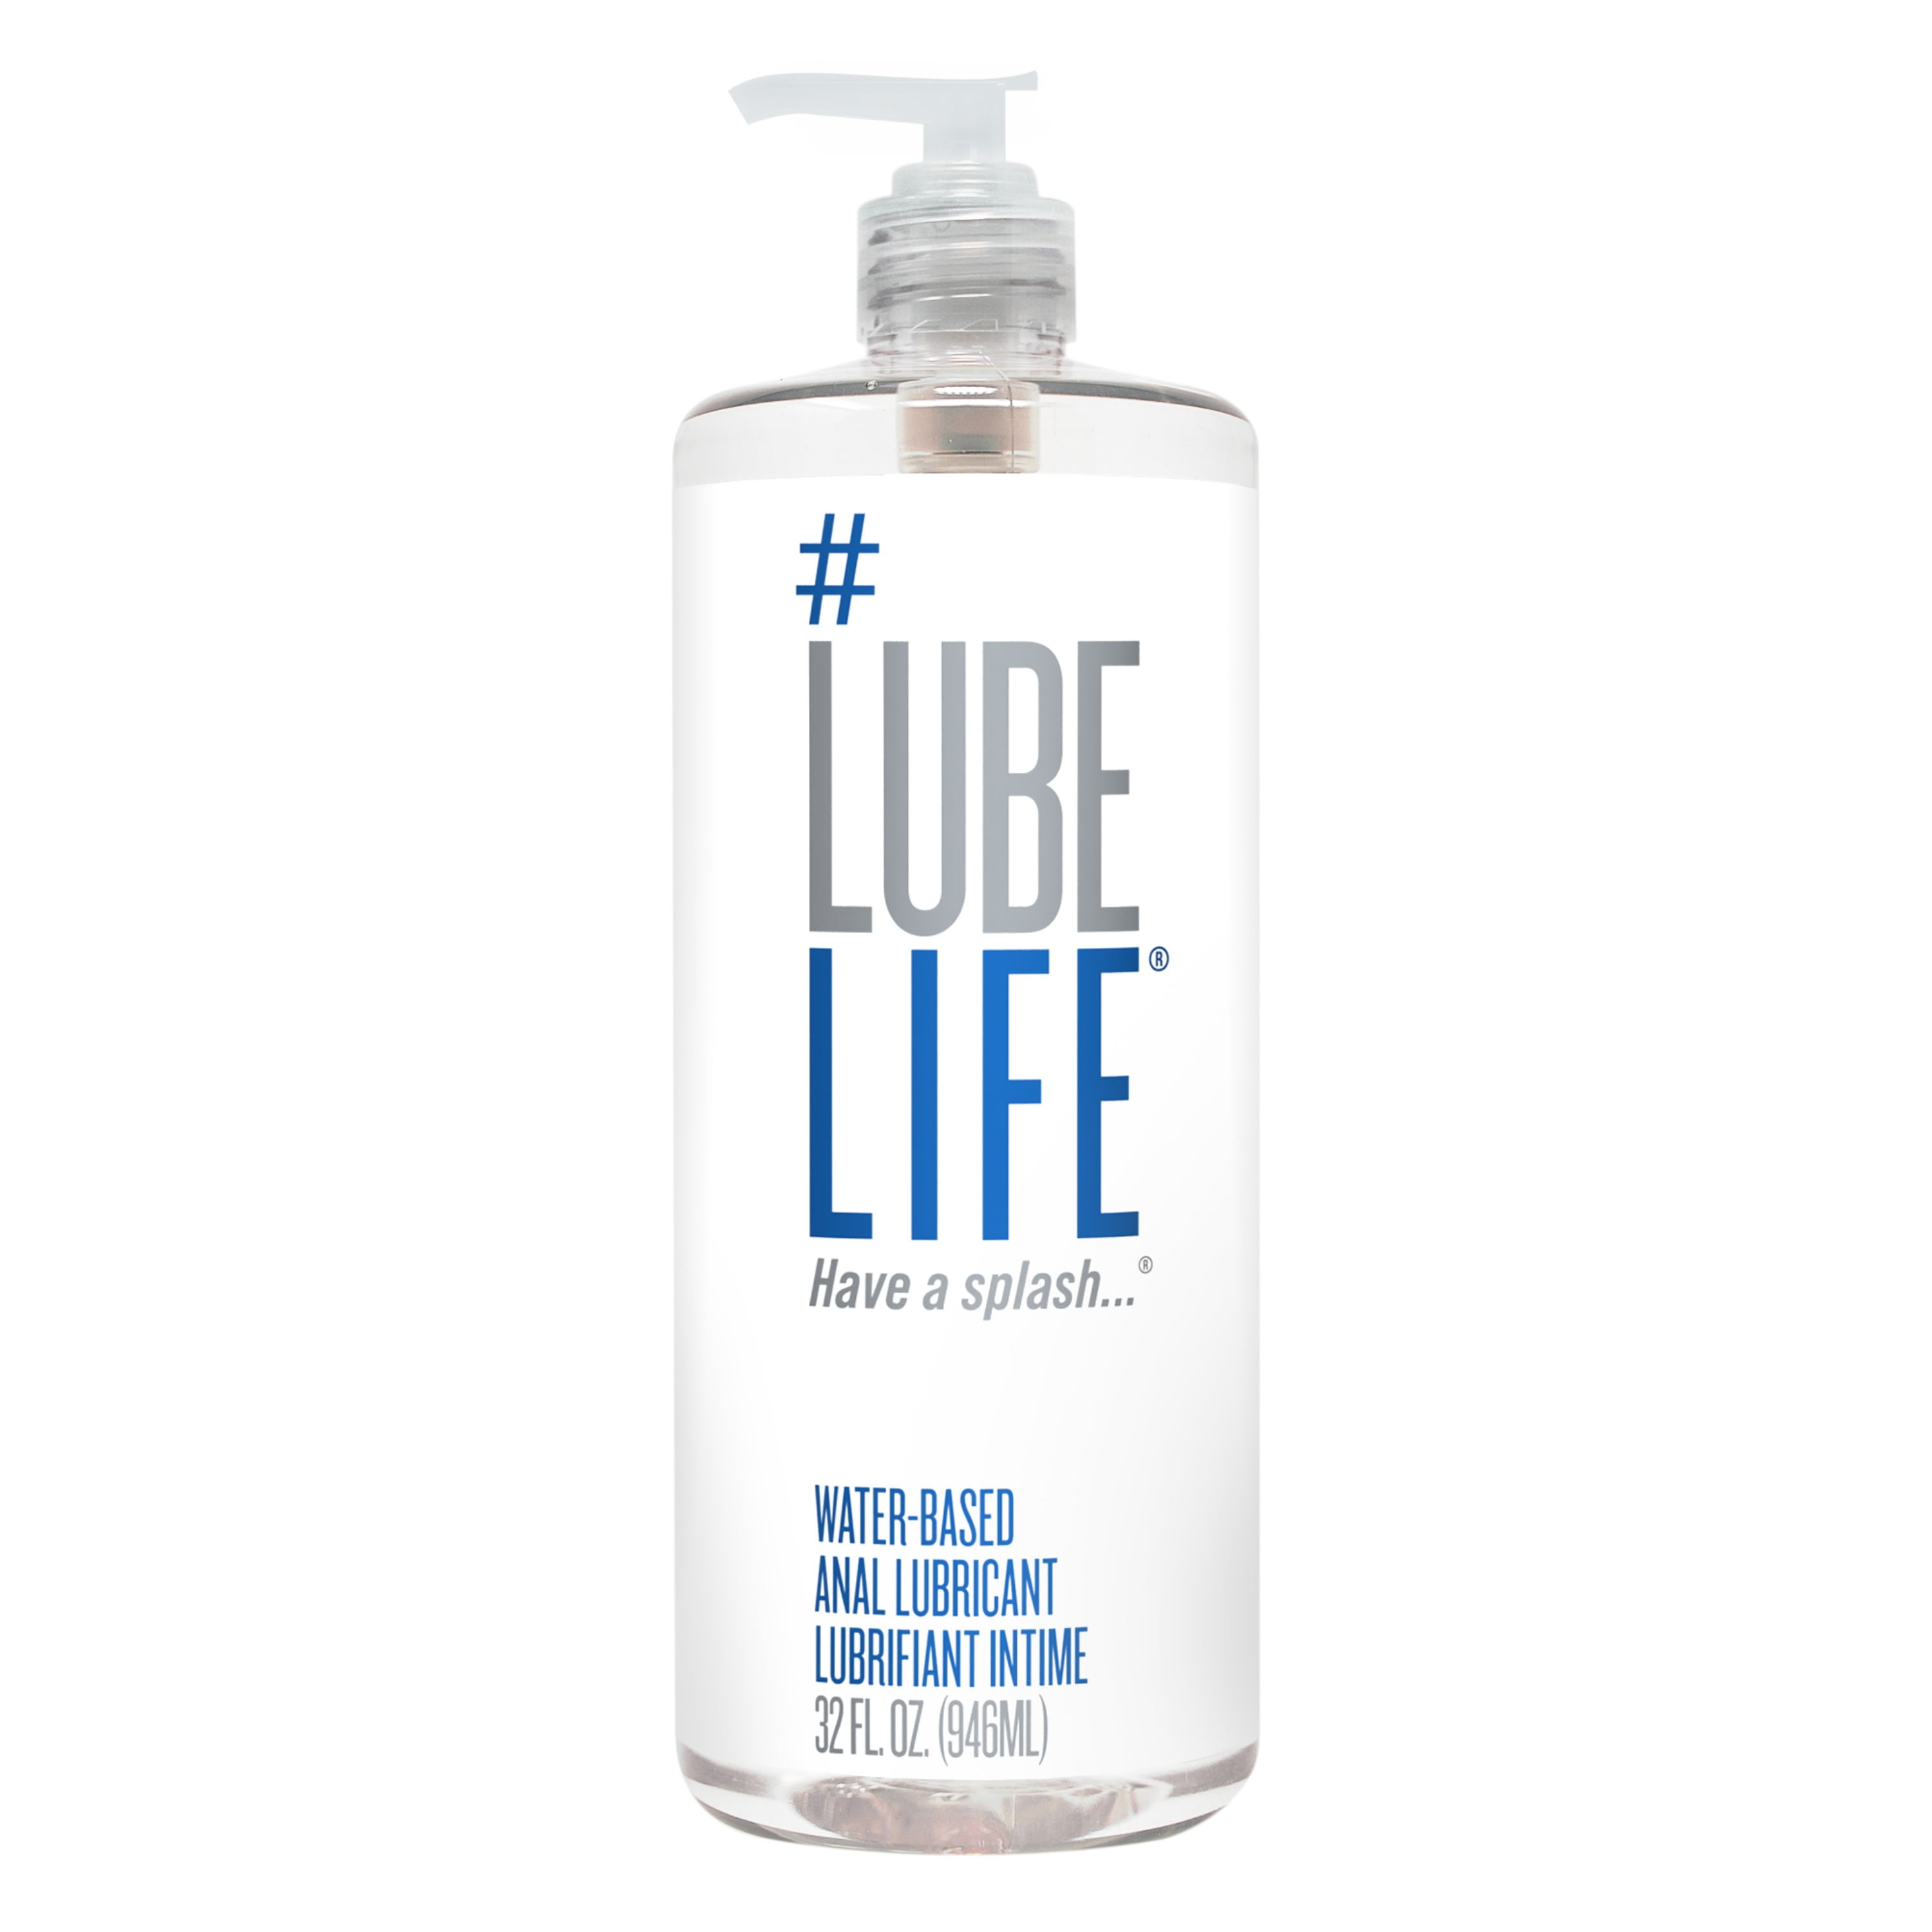 Lube Life Water-Based Anal Lubricant, Personal Backdoor Lube for Men, Women  and Couples, Non-Staining, 8 Fl Oz